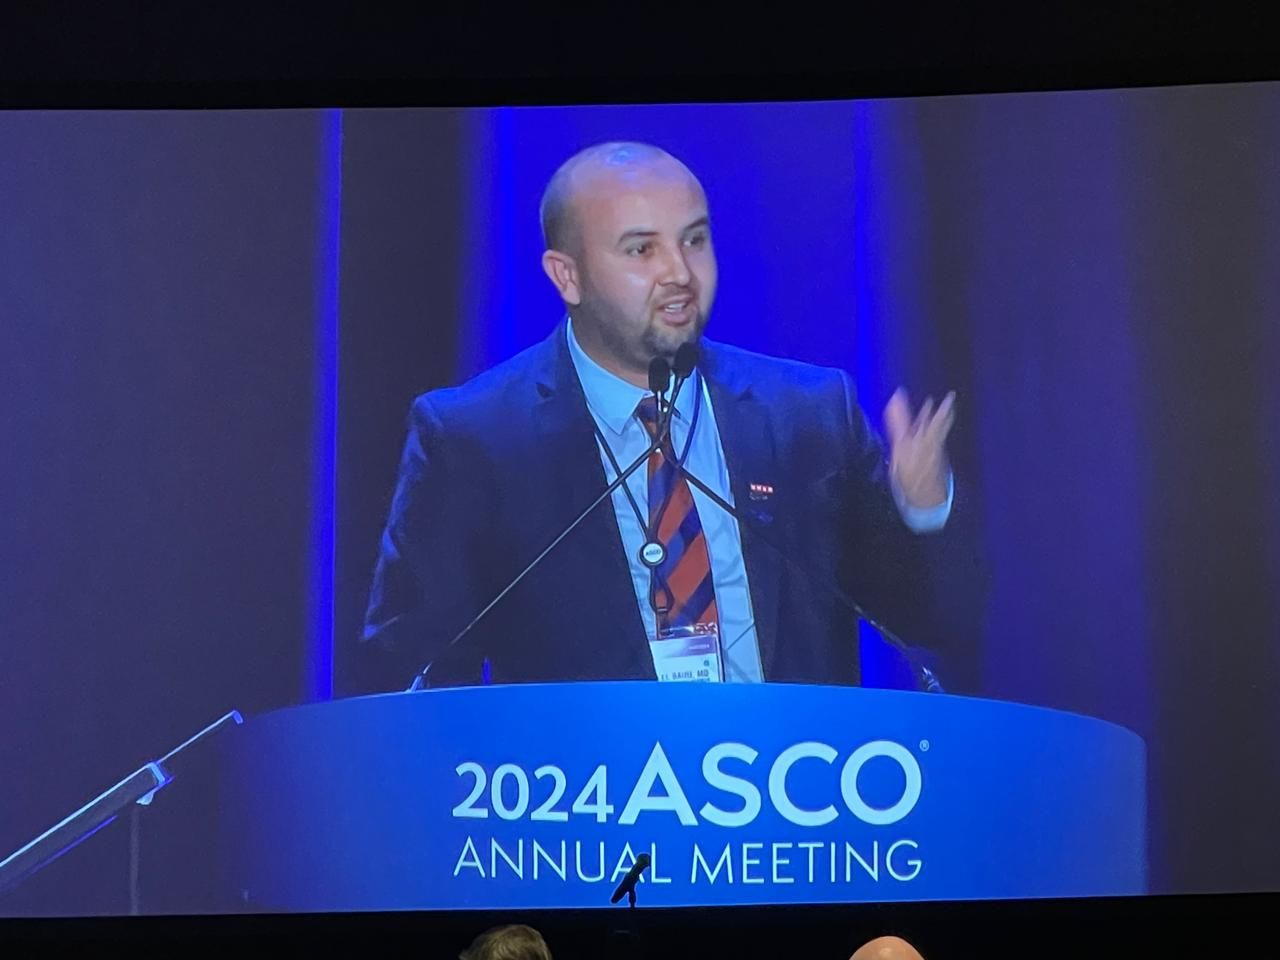 Khalid El Bairi: My first oral lecture at the Annual Meeting of the ASCO